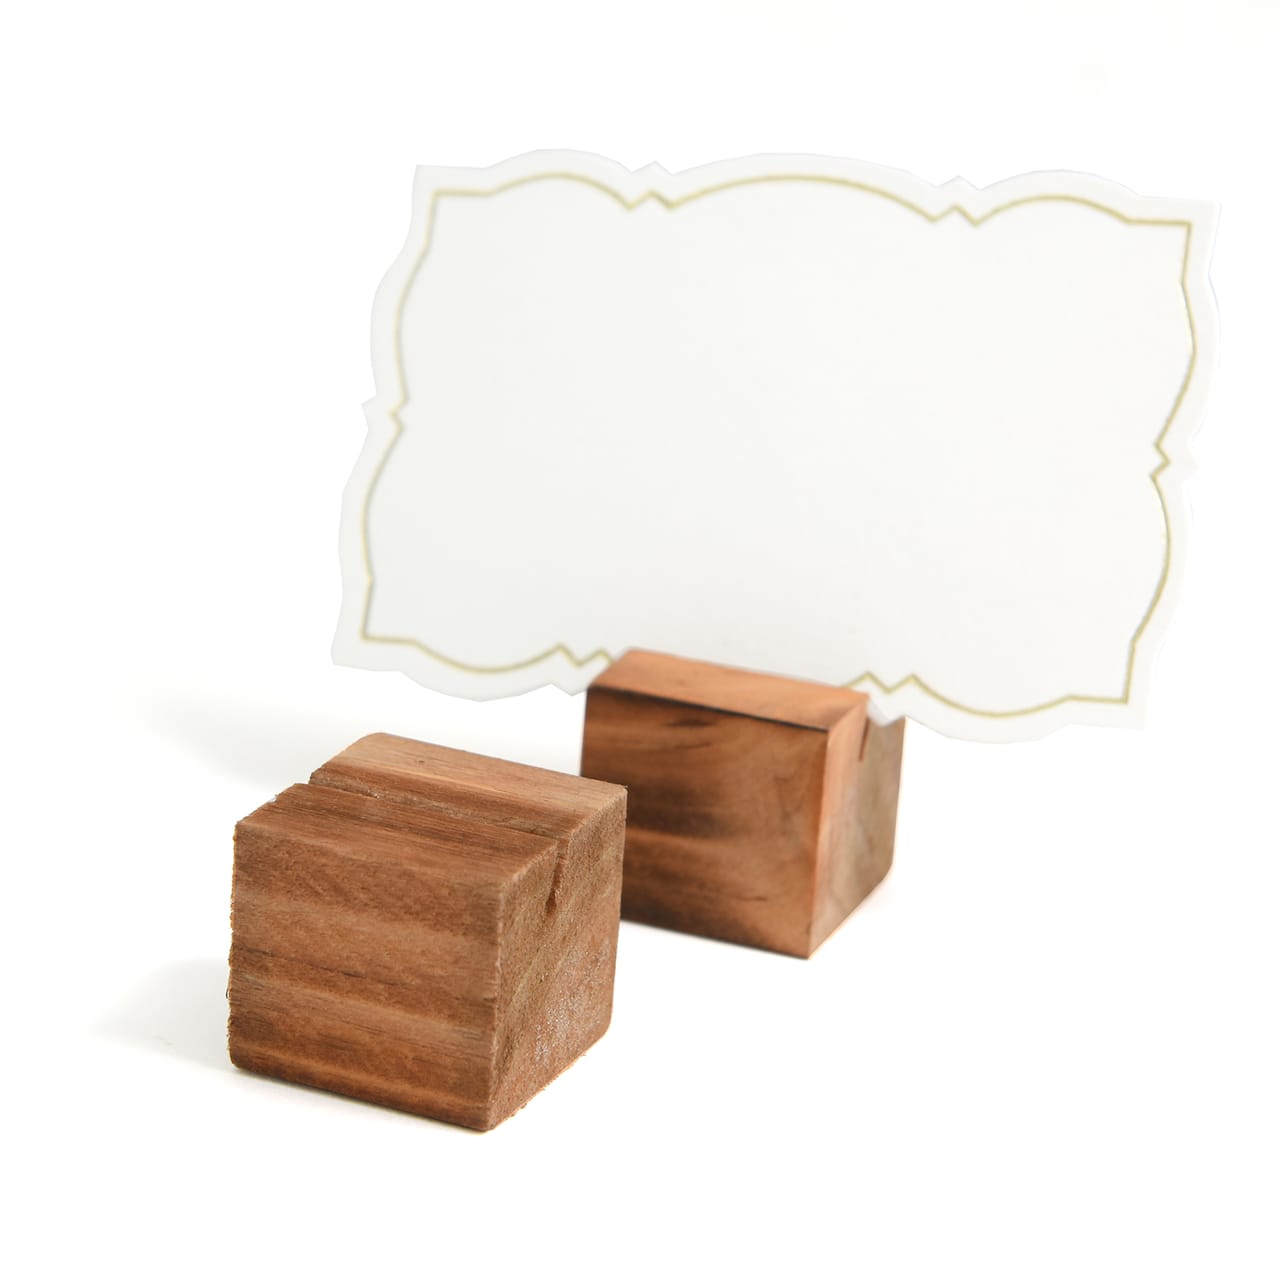 6 Packs: 12 ct. (72 total) Style Me Pretty Wooden Place Card Holders